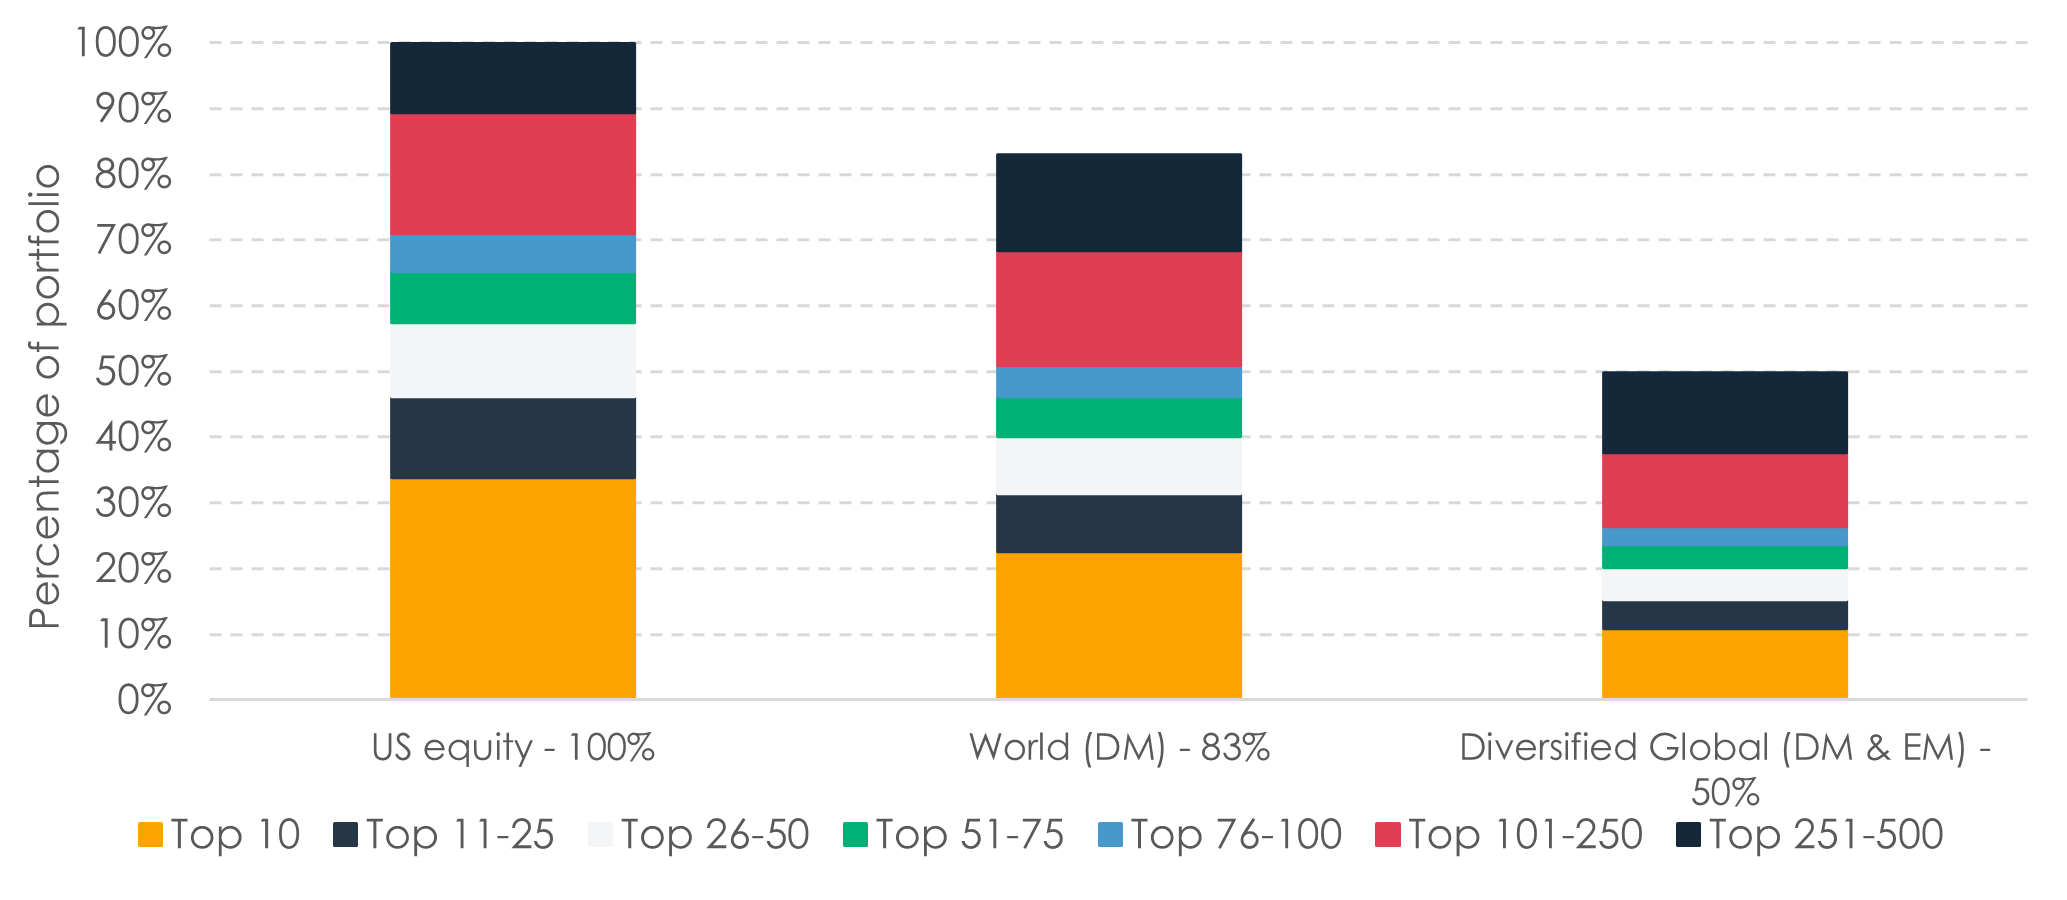 Figure 1 Comparing how much of the portfolio the Top 500 companies represent